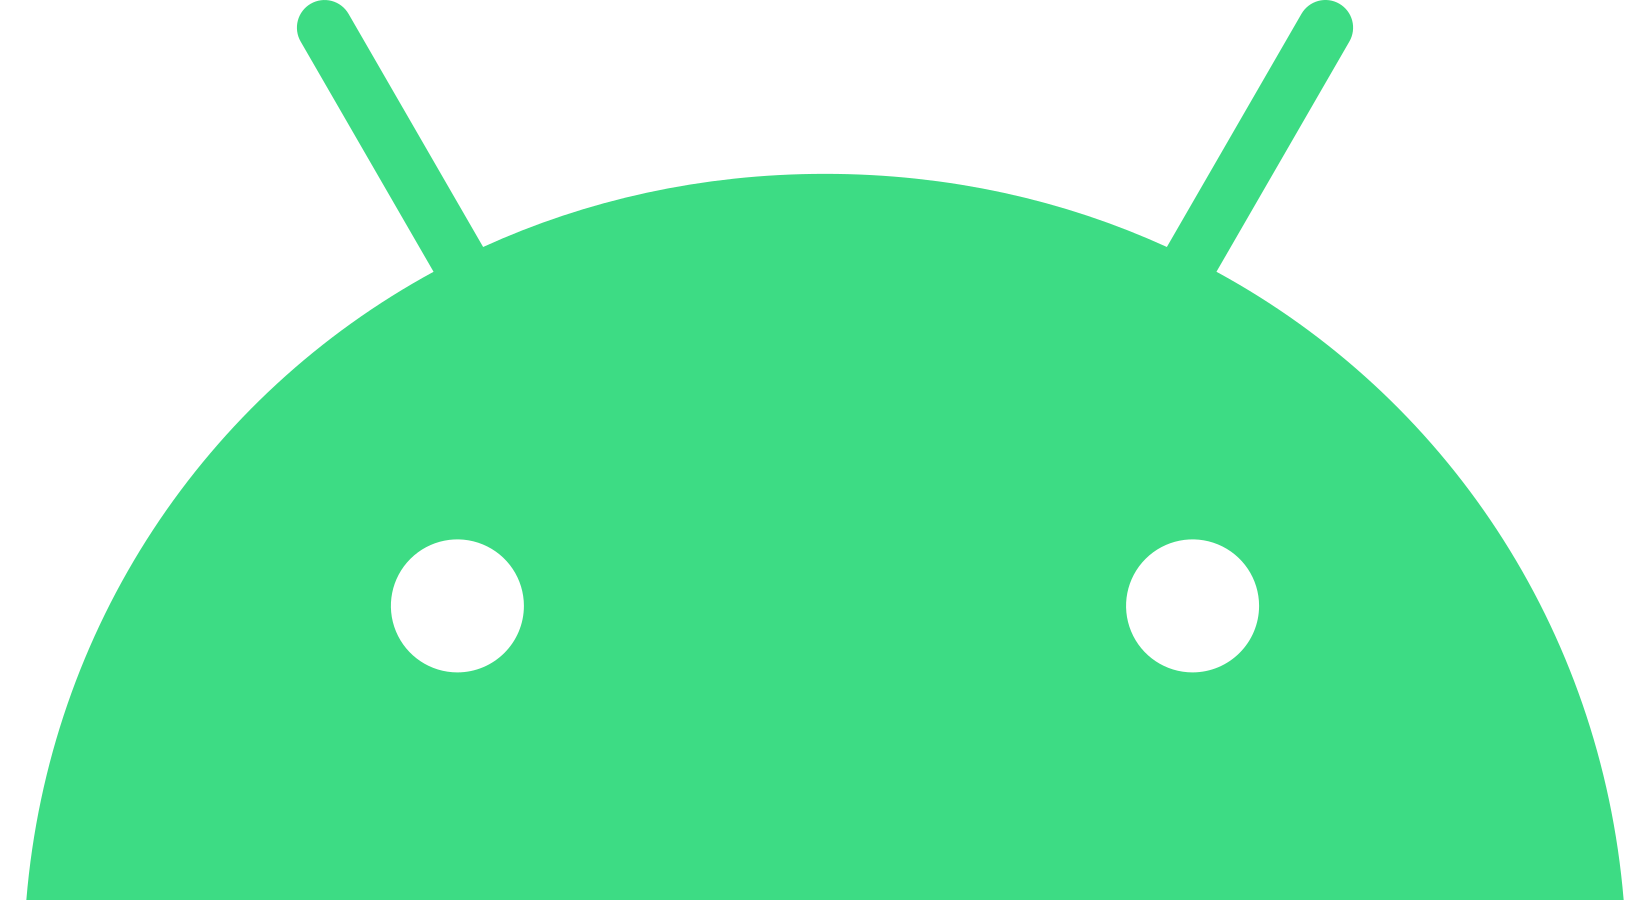 Android Robot